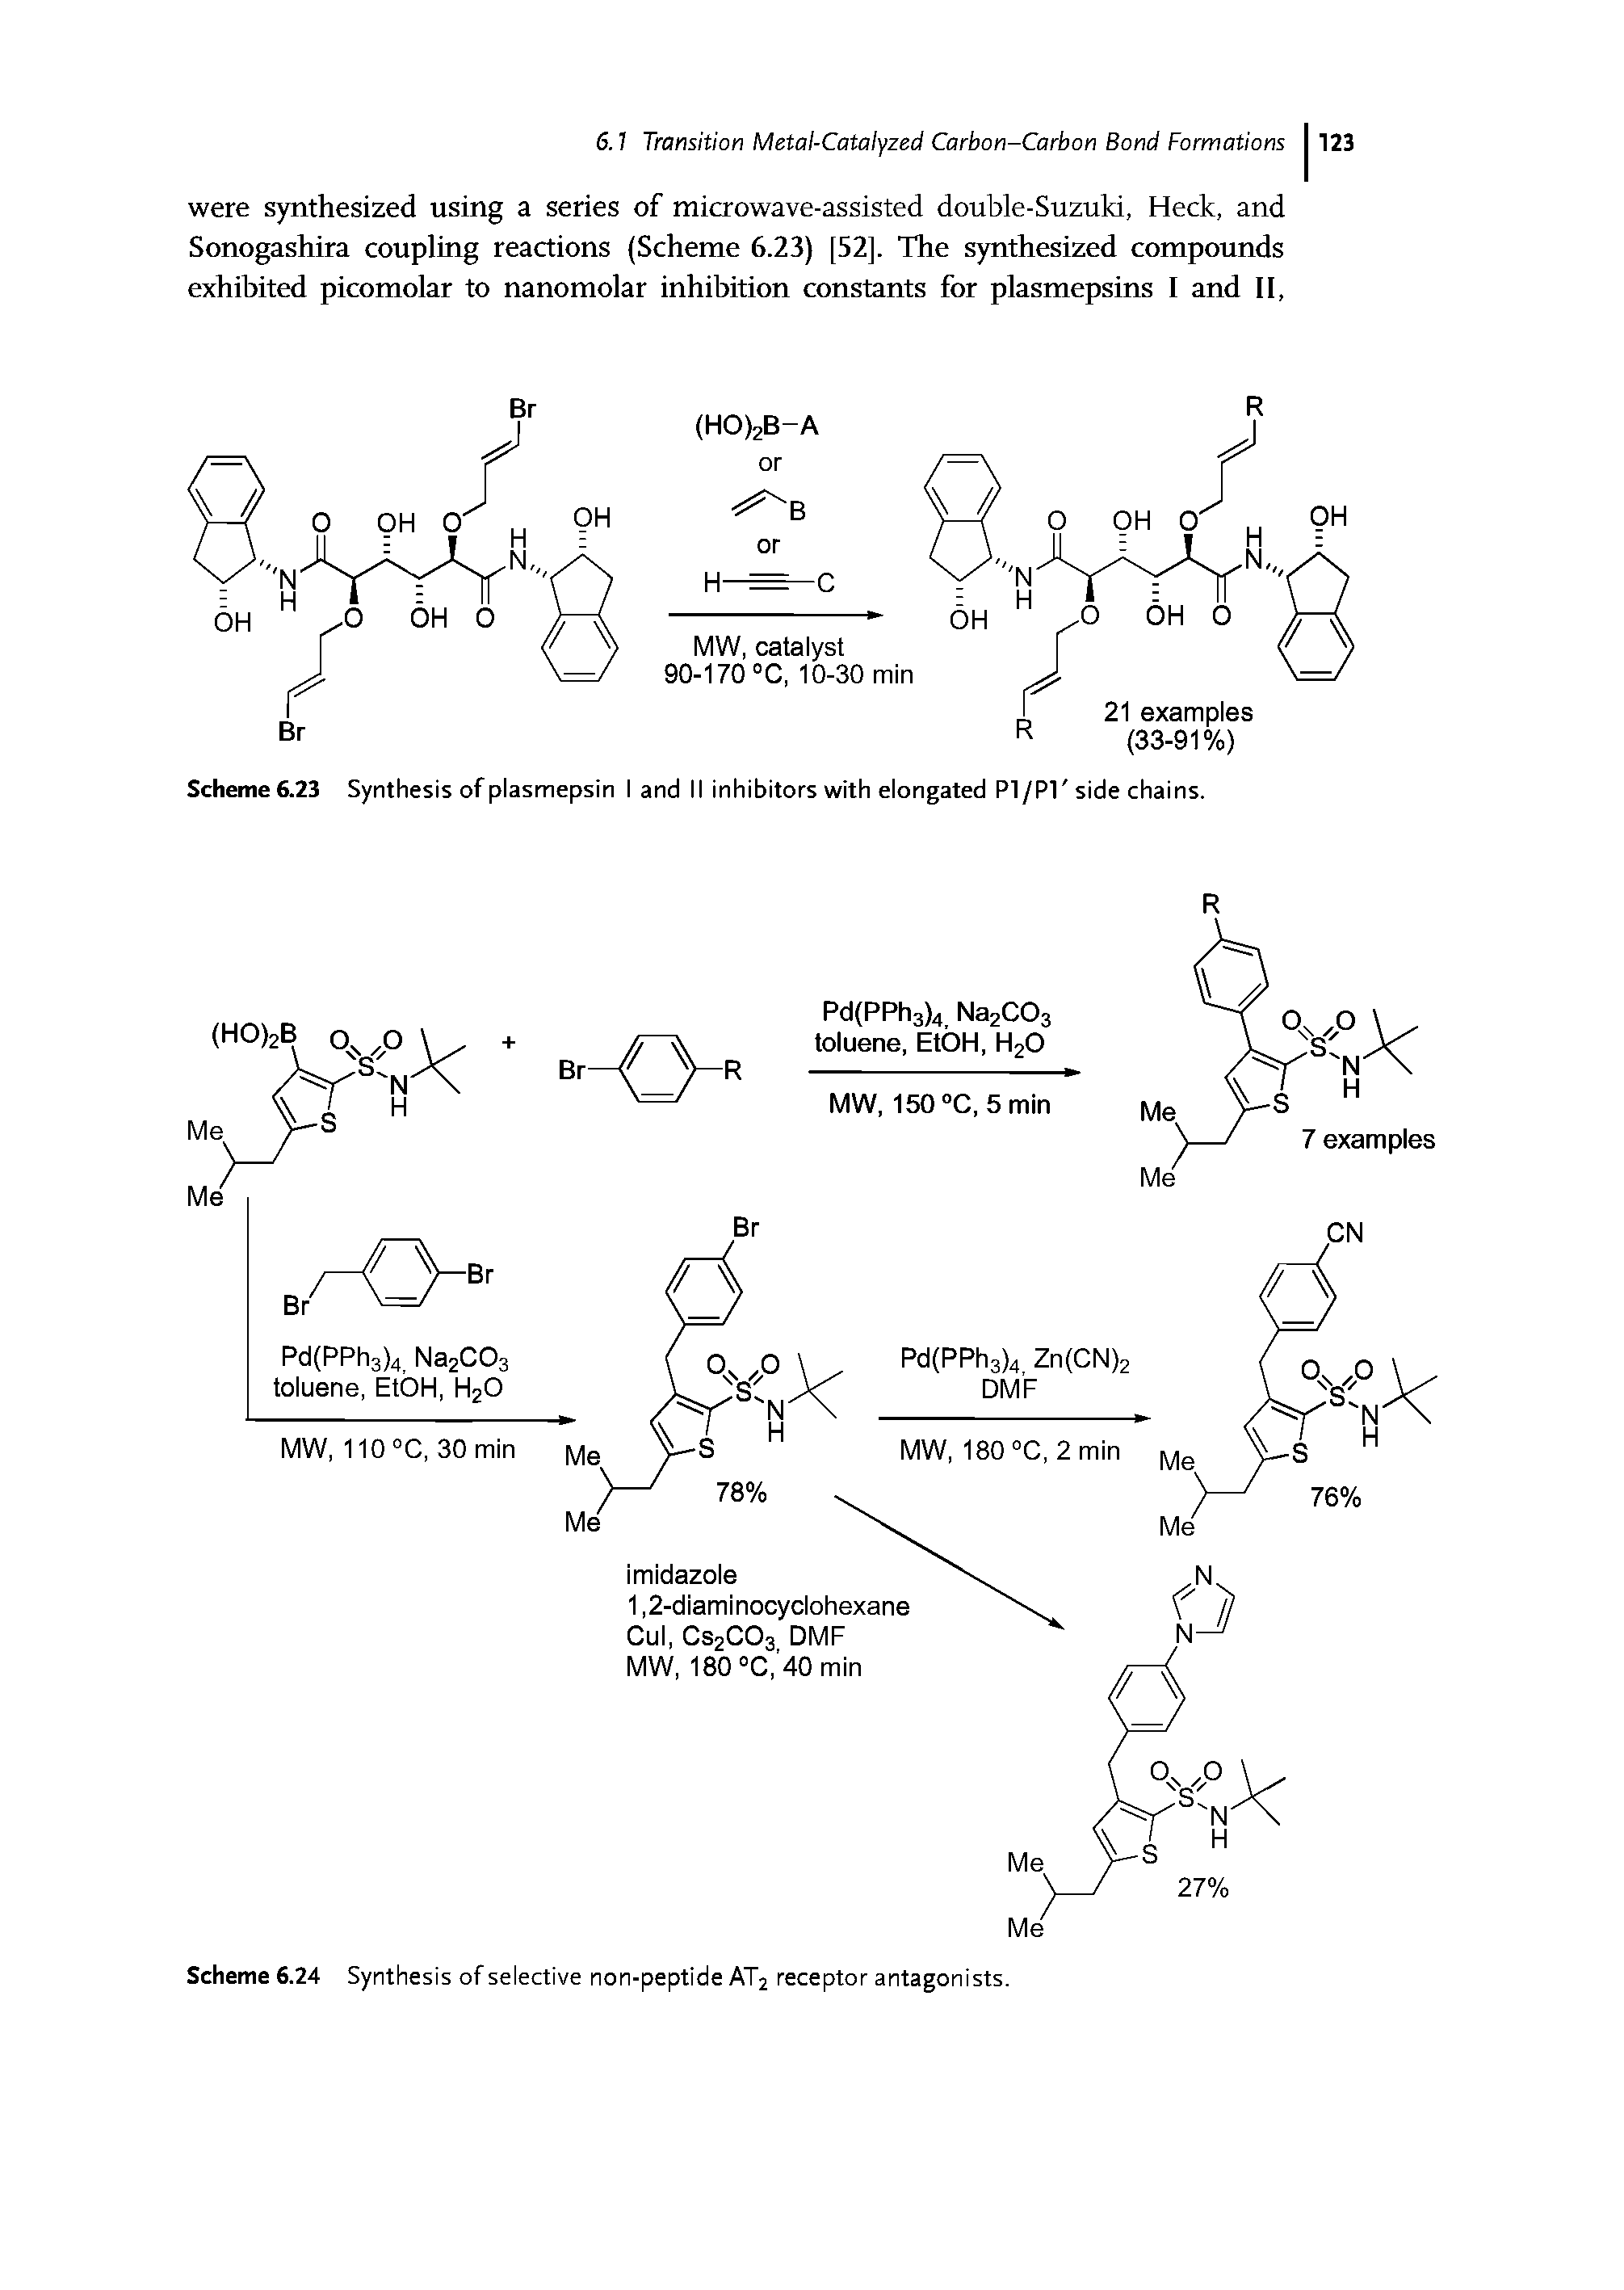 Scheme 6.23 Synthesis of plasmepsin I and II inhibitors with elongated Pl/PT side chains.